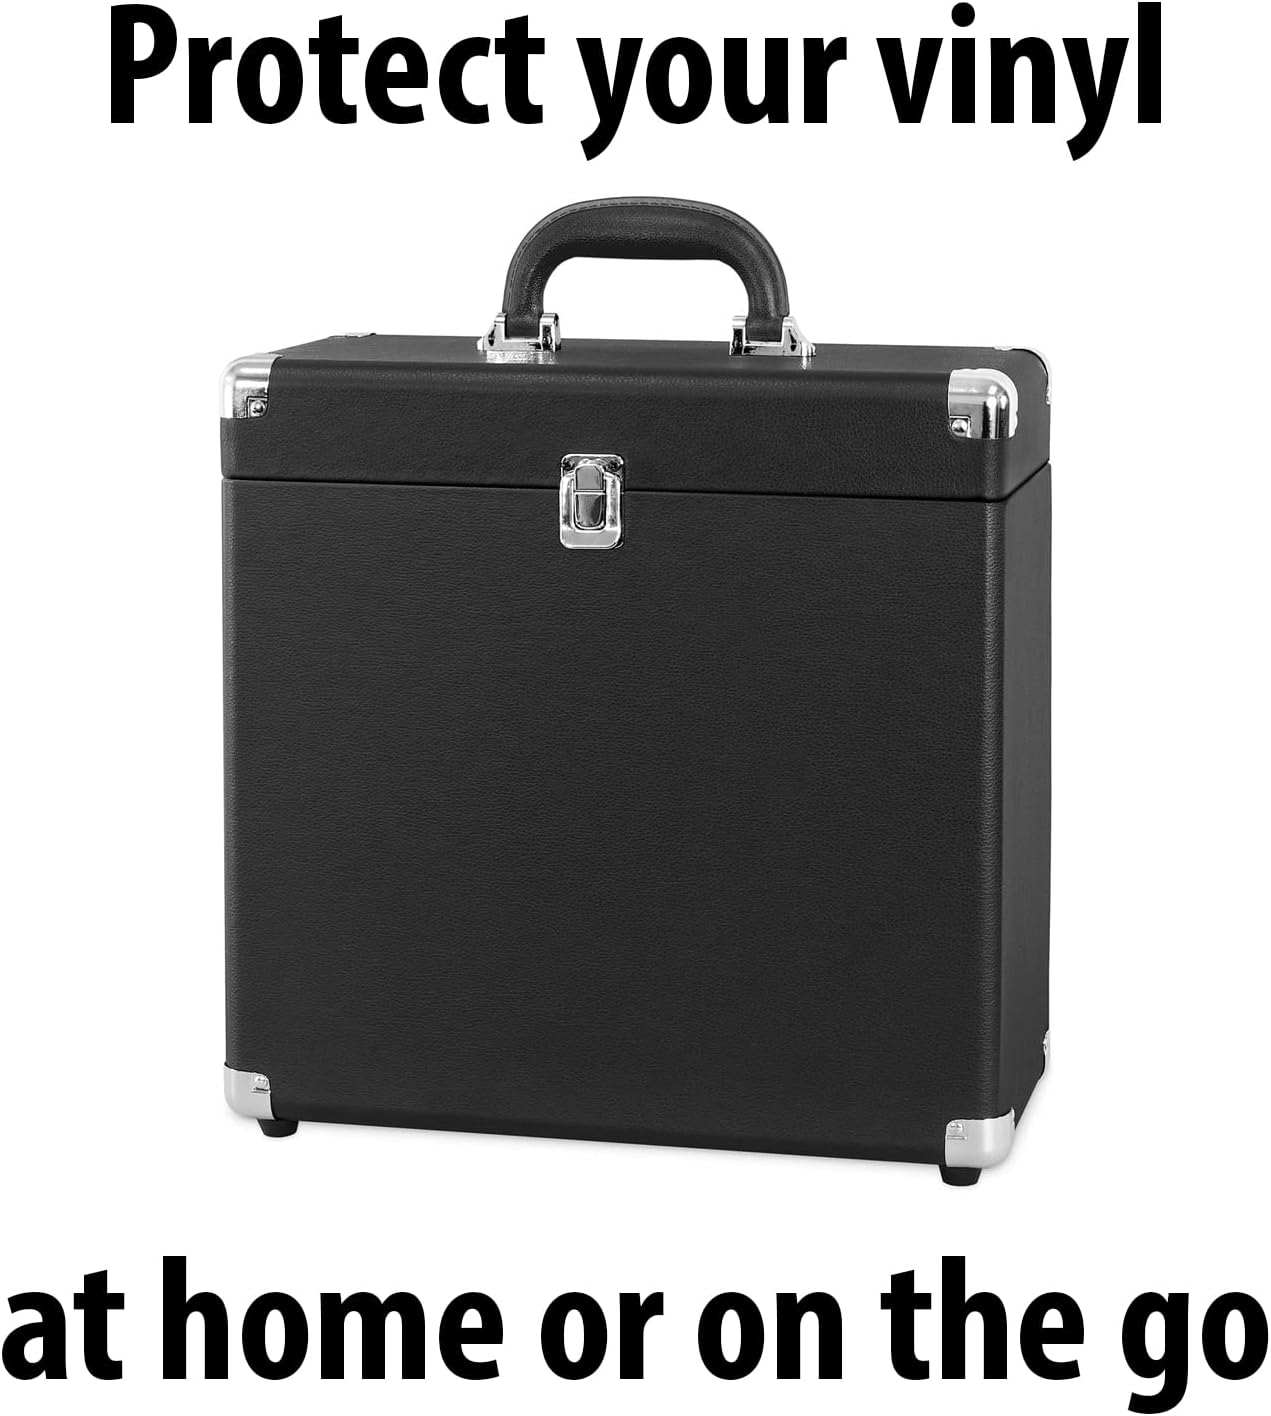 Victrola Vintage 3-Speed Bluetooth Portable Suitcase Report Player with Built-in Speakers | Upgraded Turntable Audio Sound| Includes Extra Stylus | Black, Prototype Number: VSC-550BT-BK, 1SFA